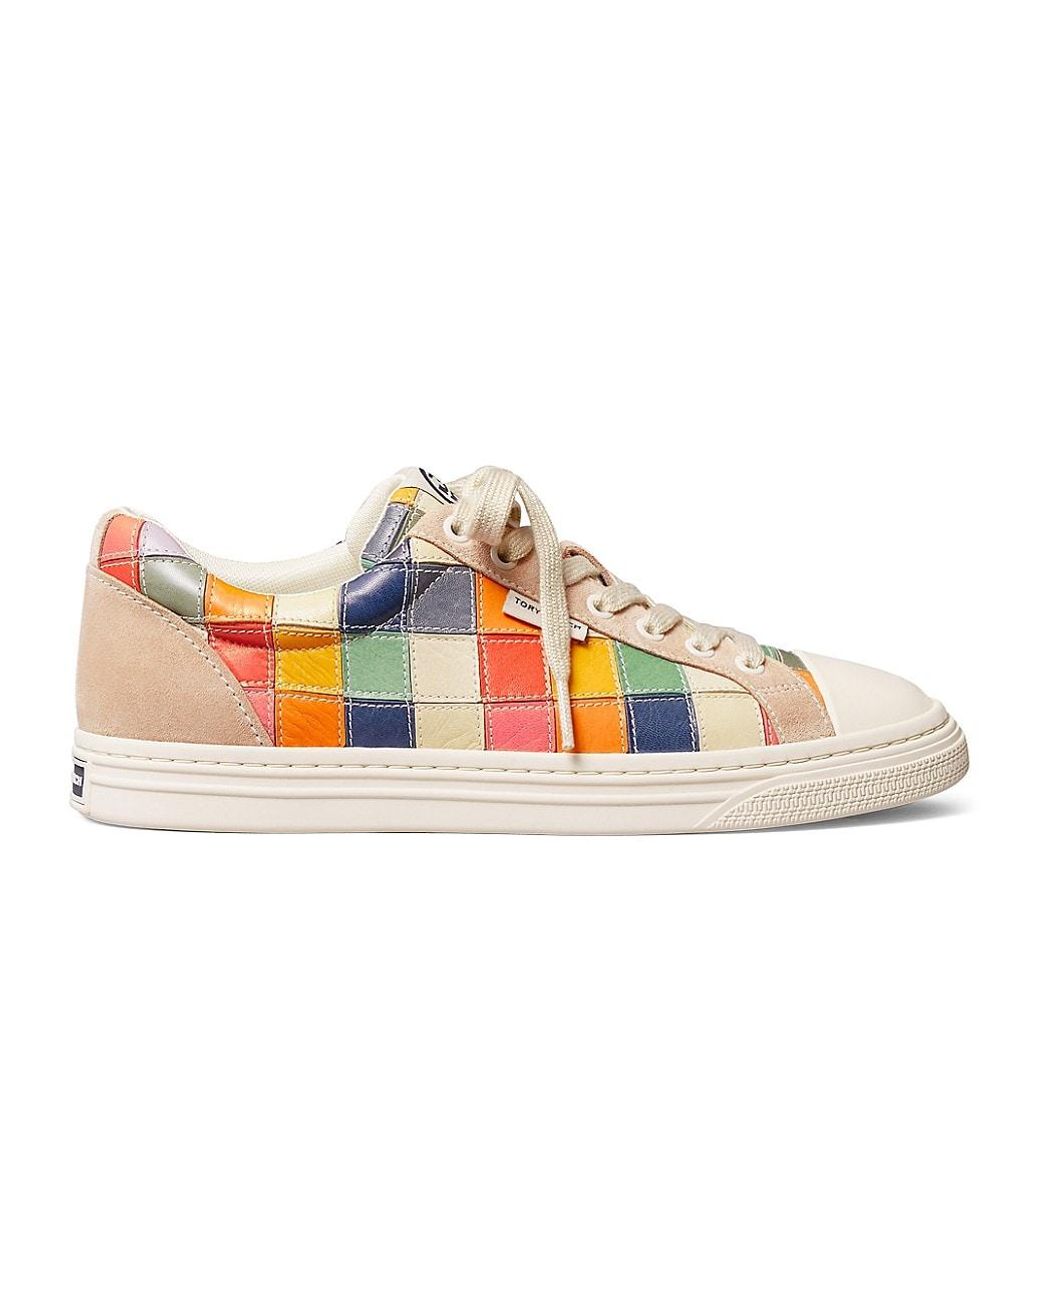 Descubrir 45+ imagen tory burch classic court patchwork leather sneakers